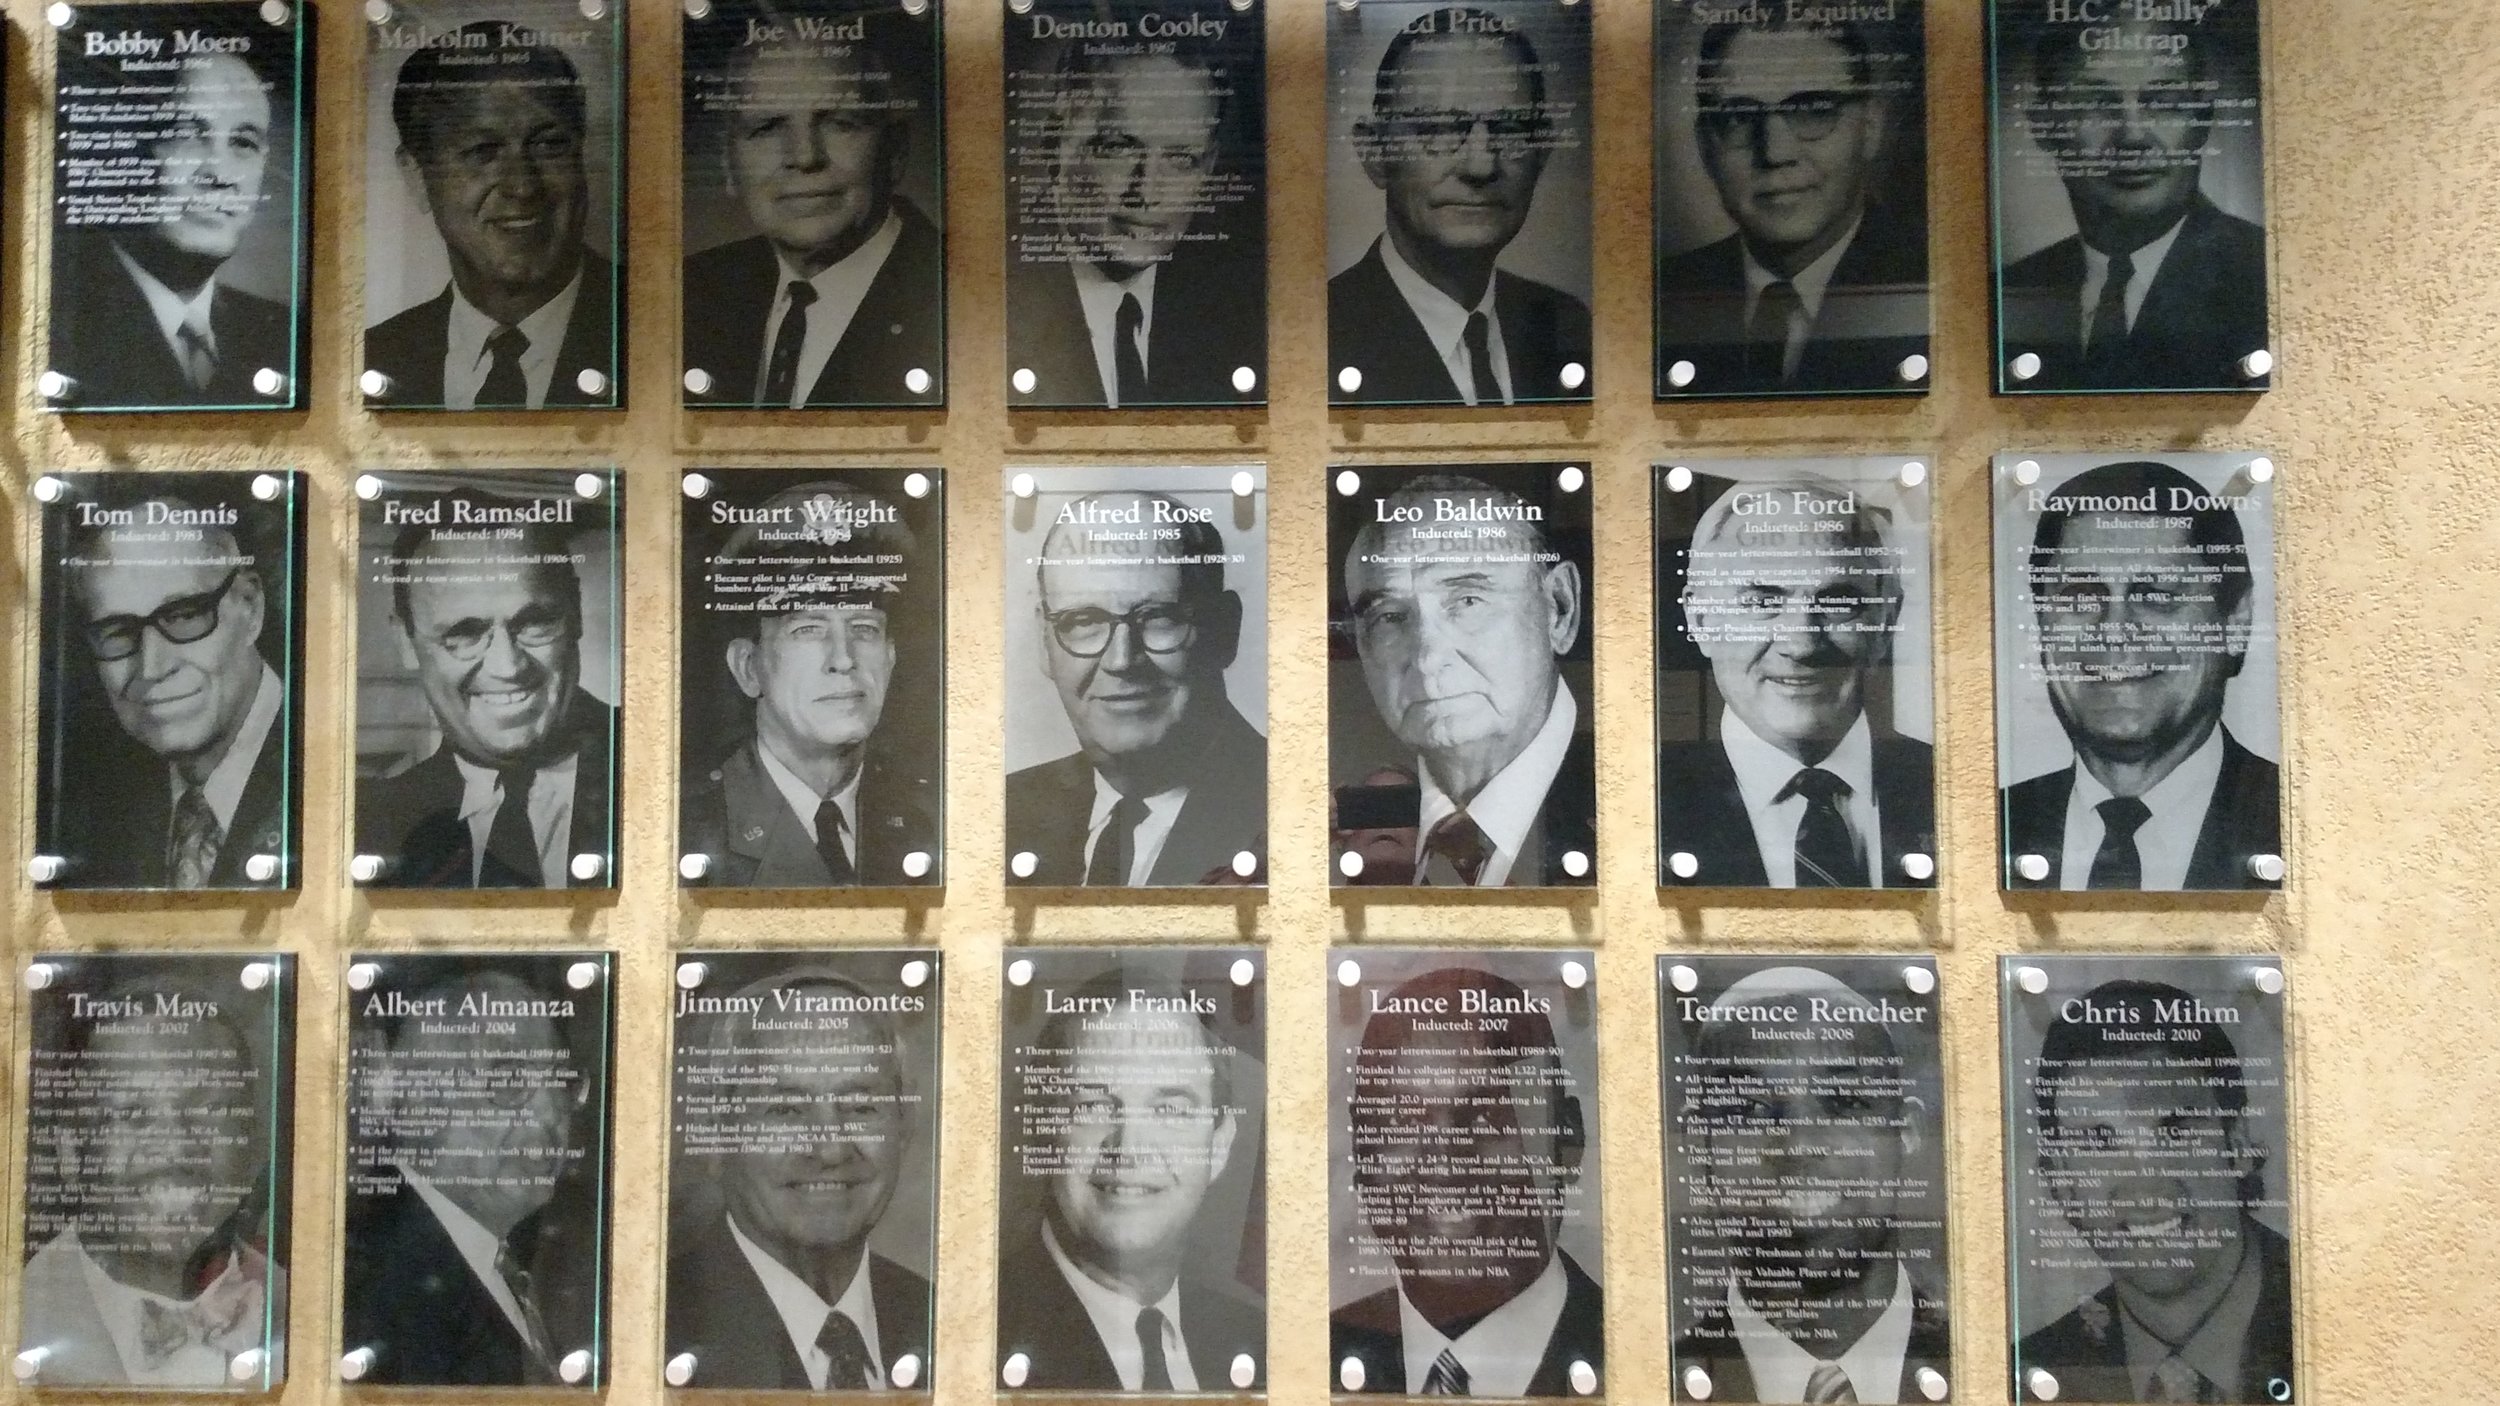 Hall of Honor